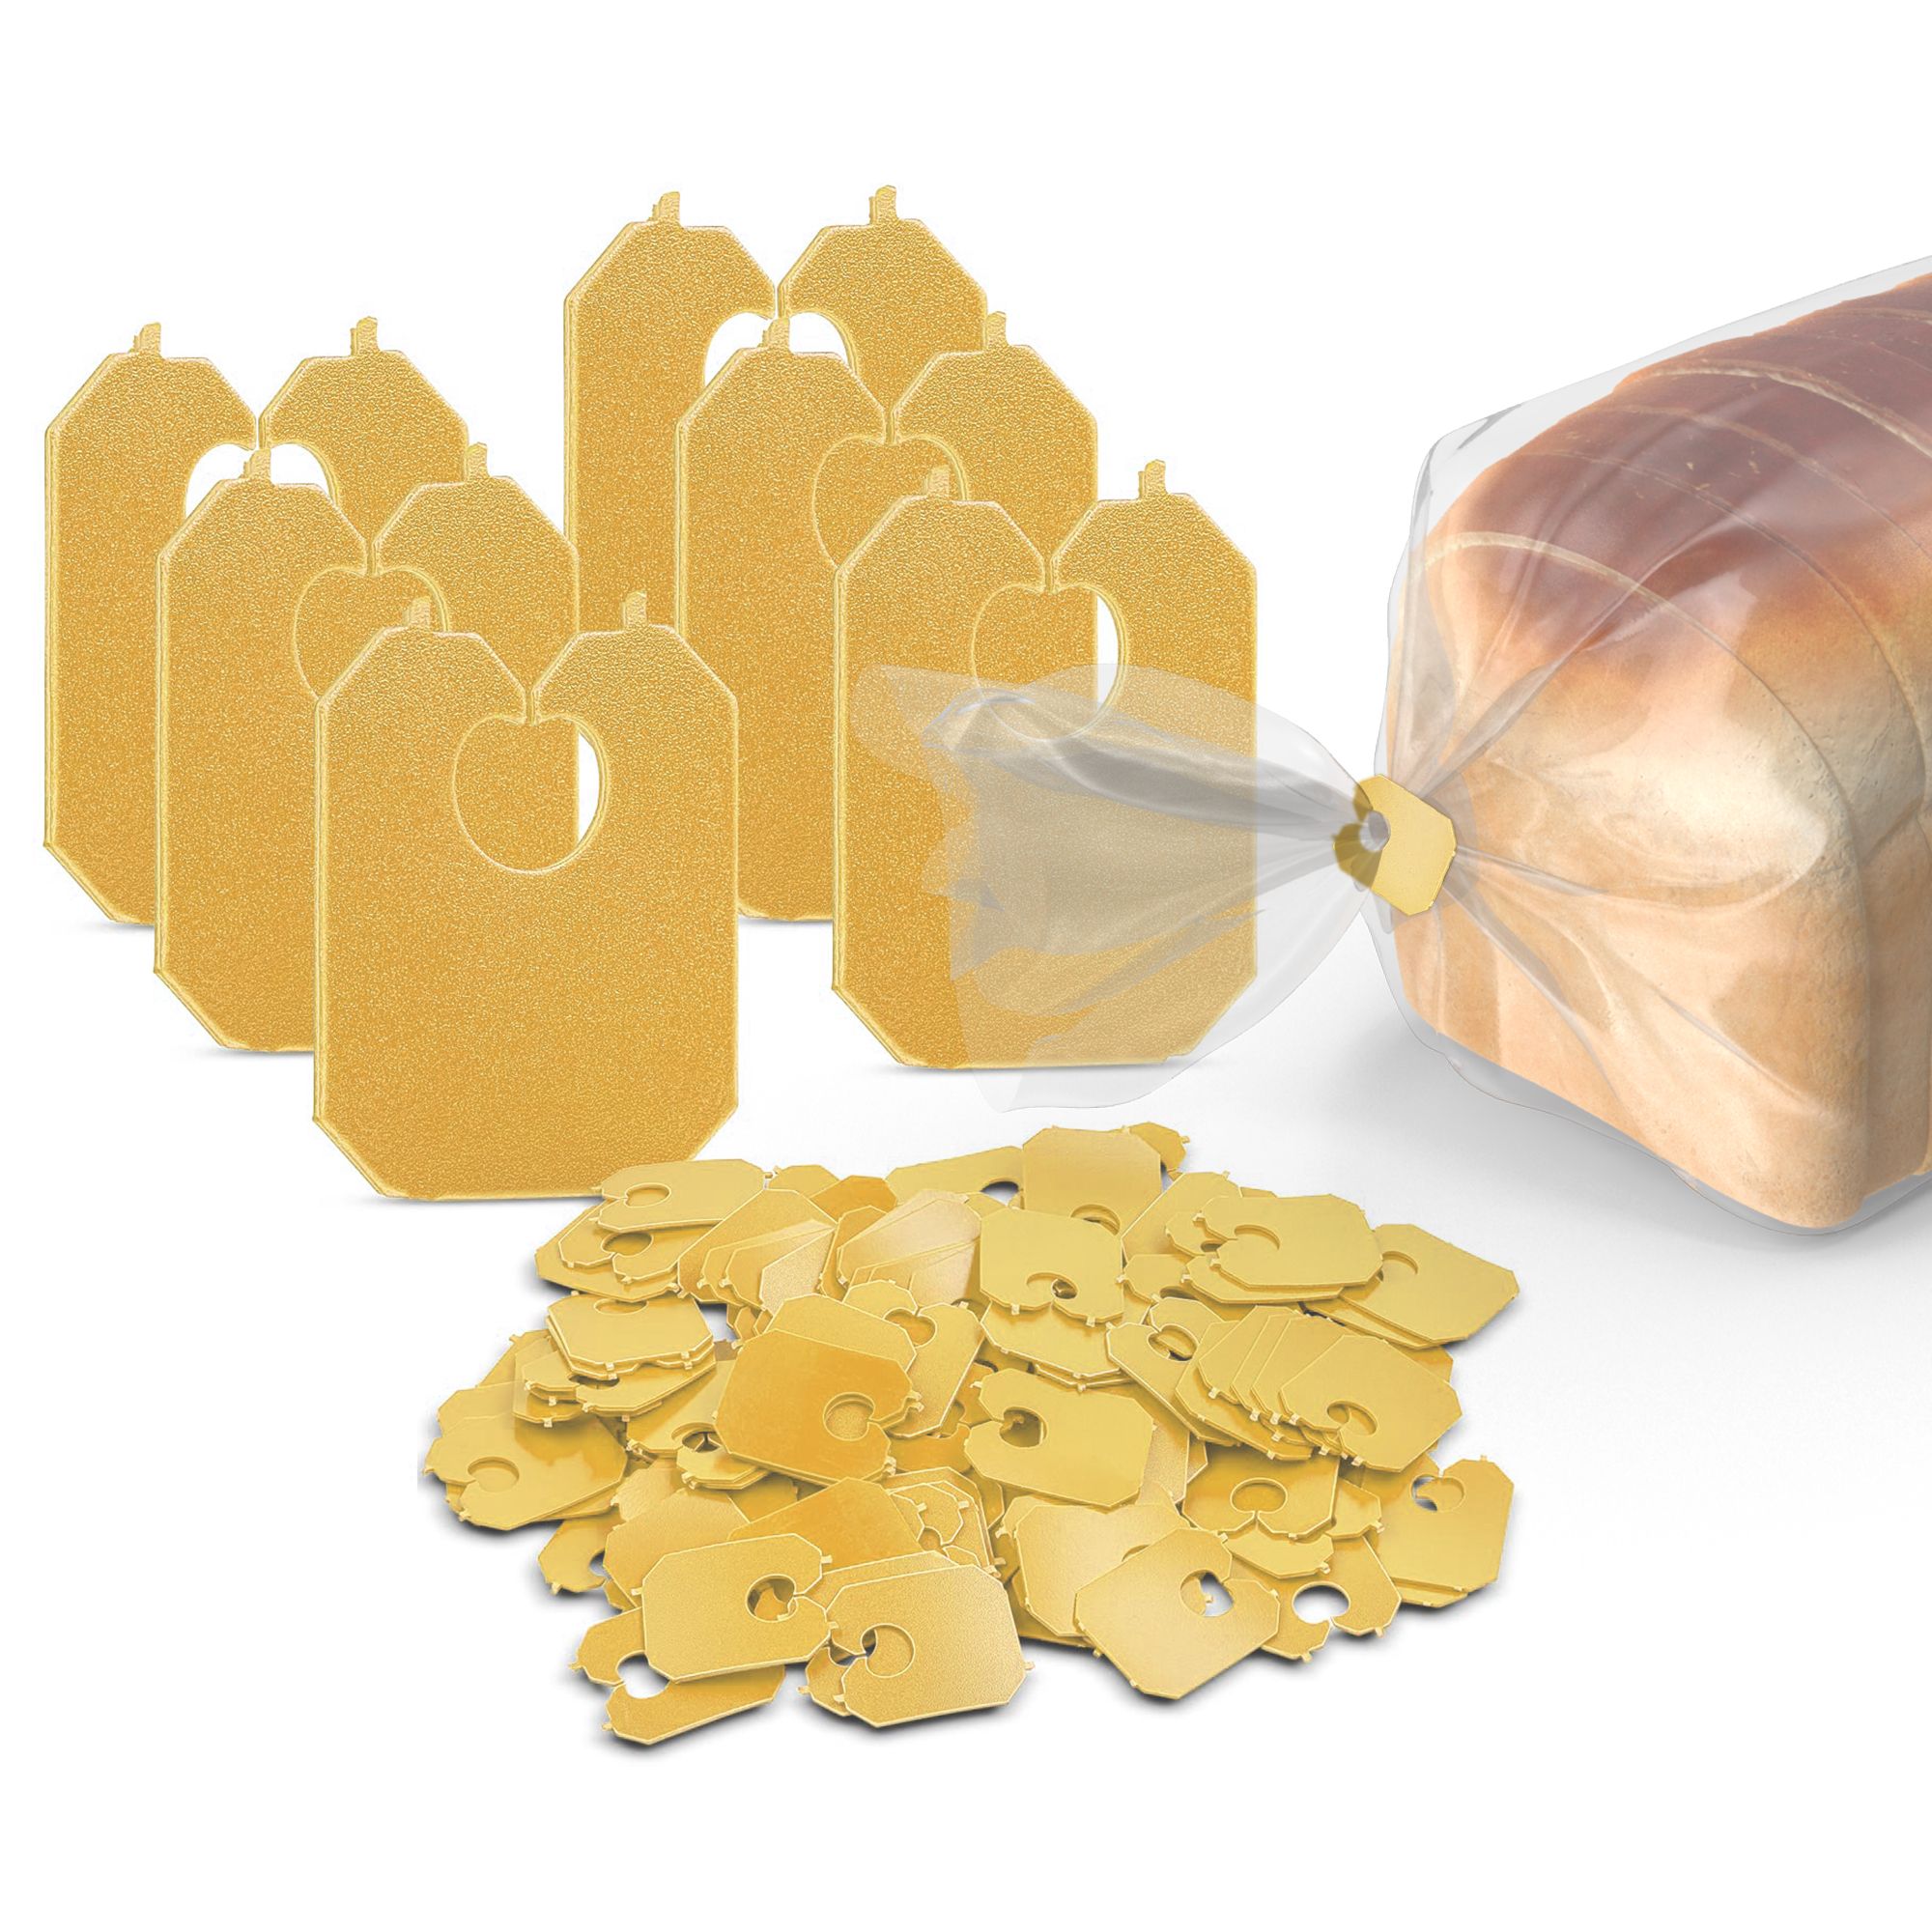 White Plastic Bread Clips 7/8 x 1 1/8 inches - Disposable Bread Tie by MT  Products (100 Pieces)